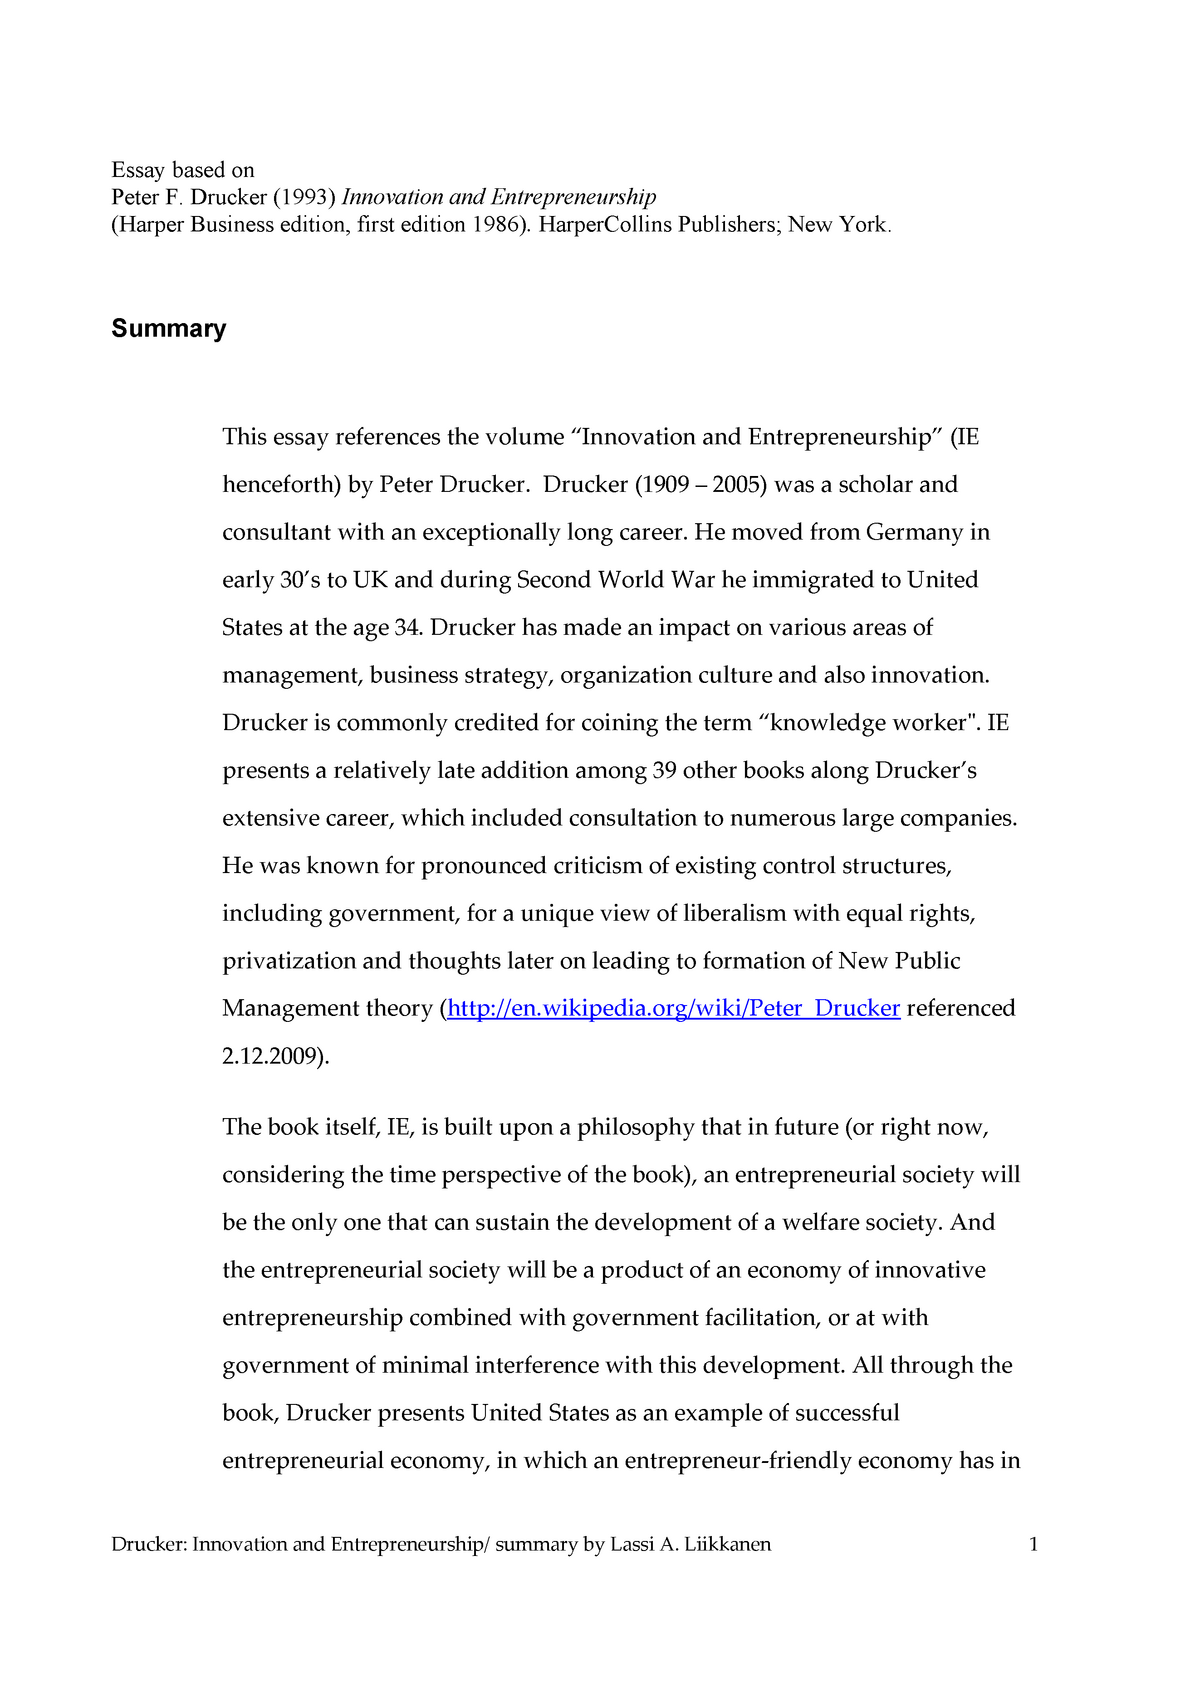 Examples of business dissertation titles